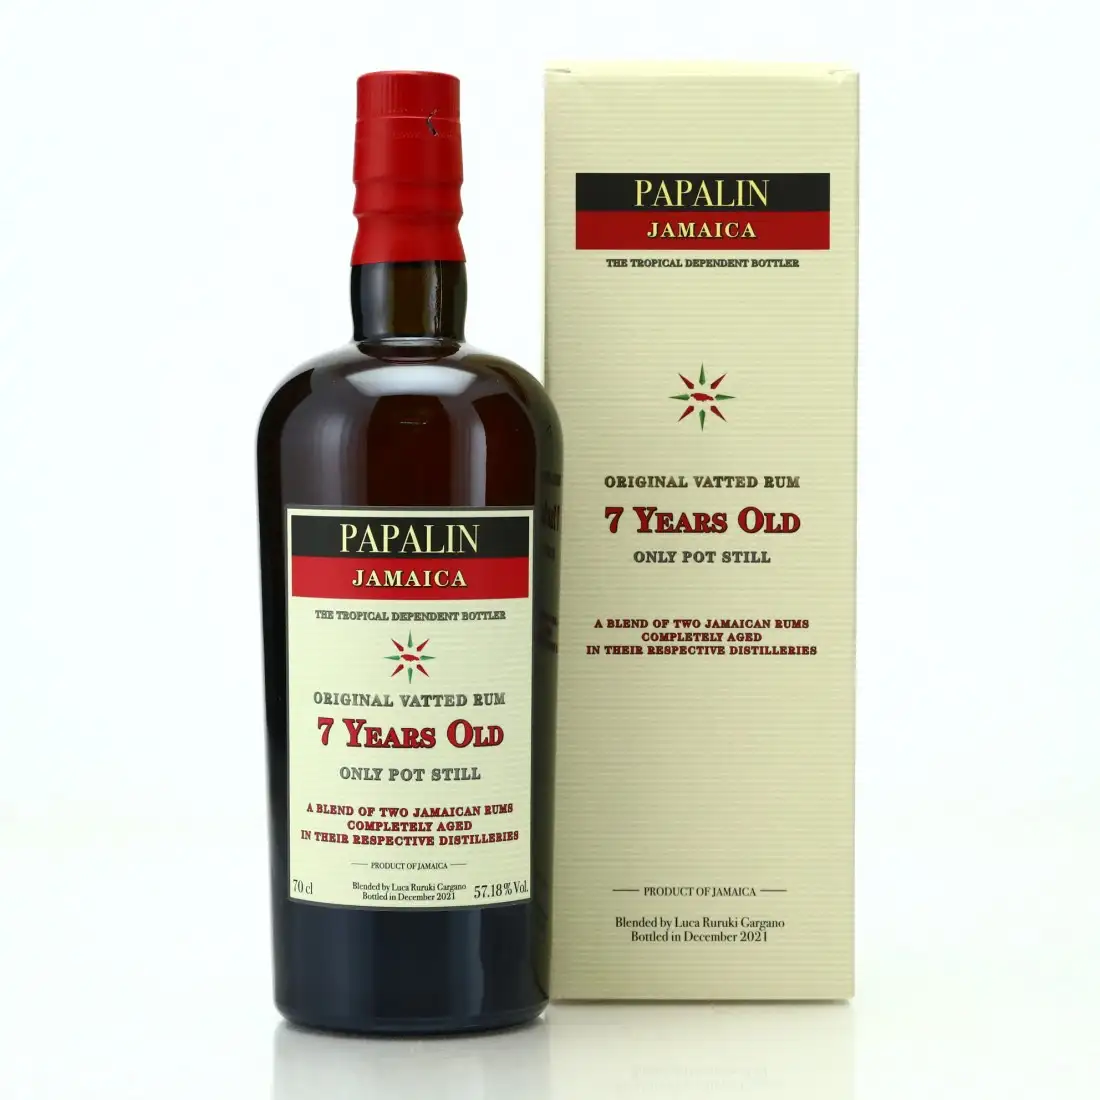 Image of the front of the bottle of the rum Papalin Jamaica